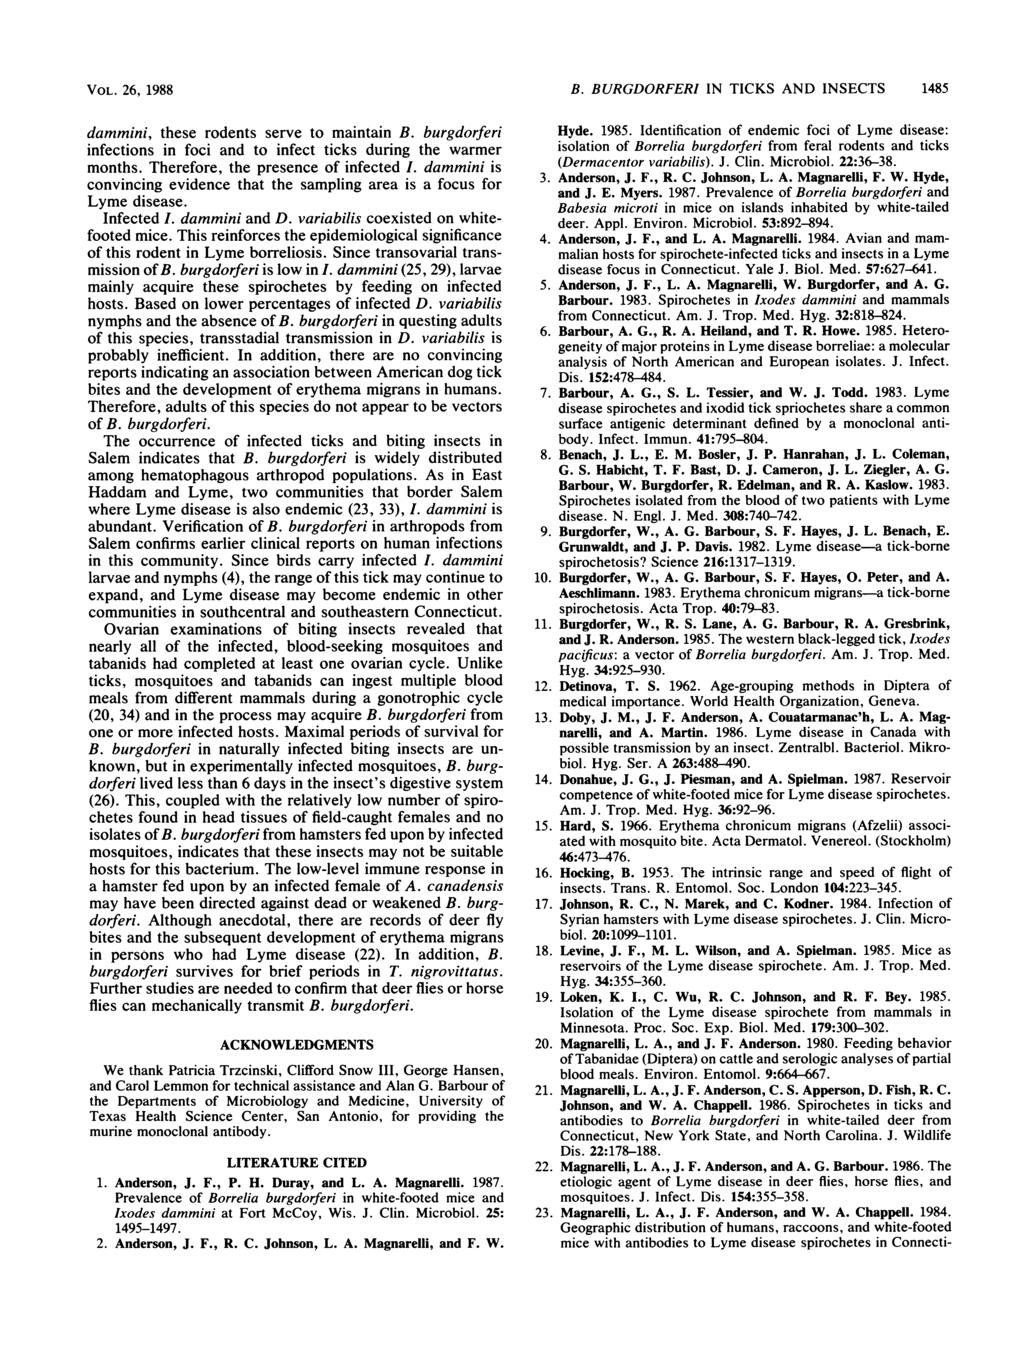 VOL. 26, 1988 dammini, these rodents serve to maintain B. burgdorferi infections in foci and to infect ticks during the warmer months. Therefore, the presence of infected I.